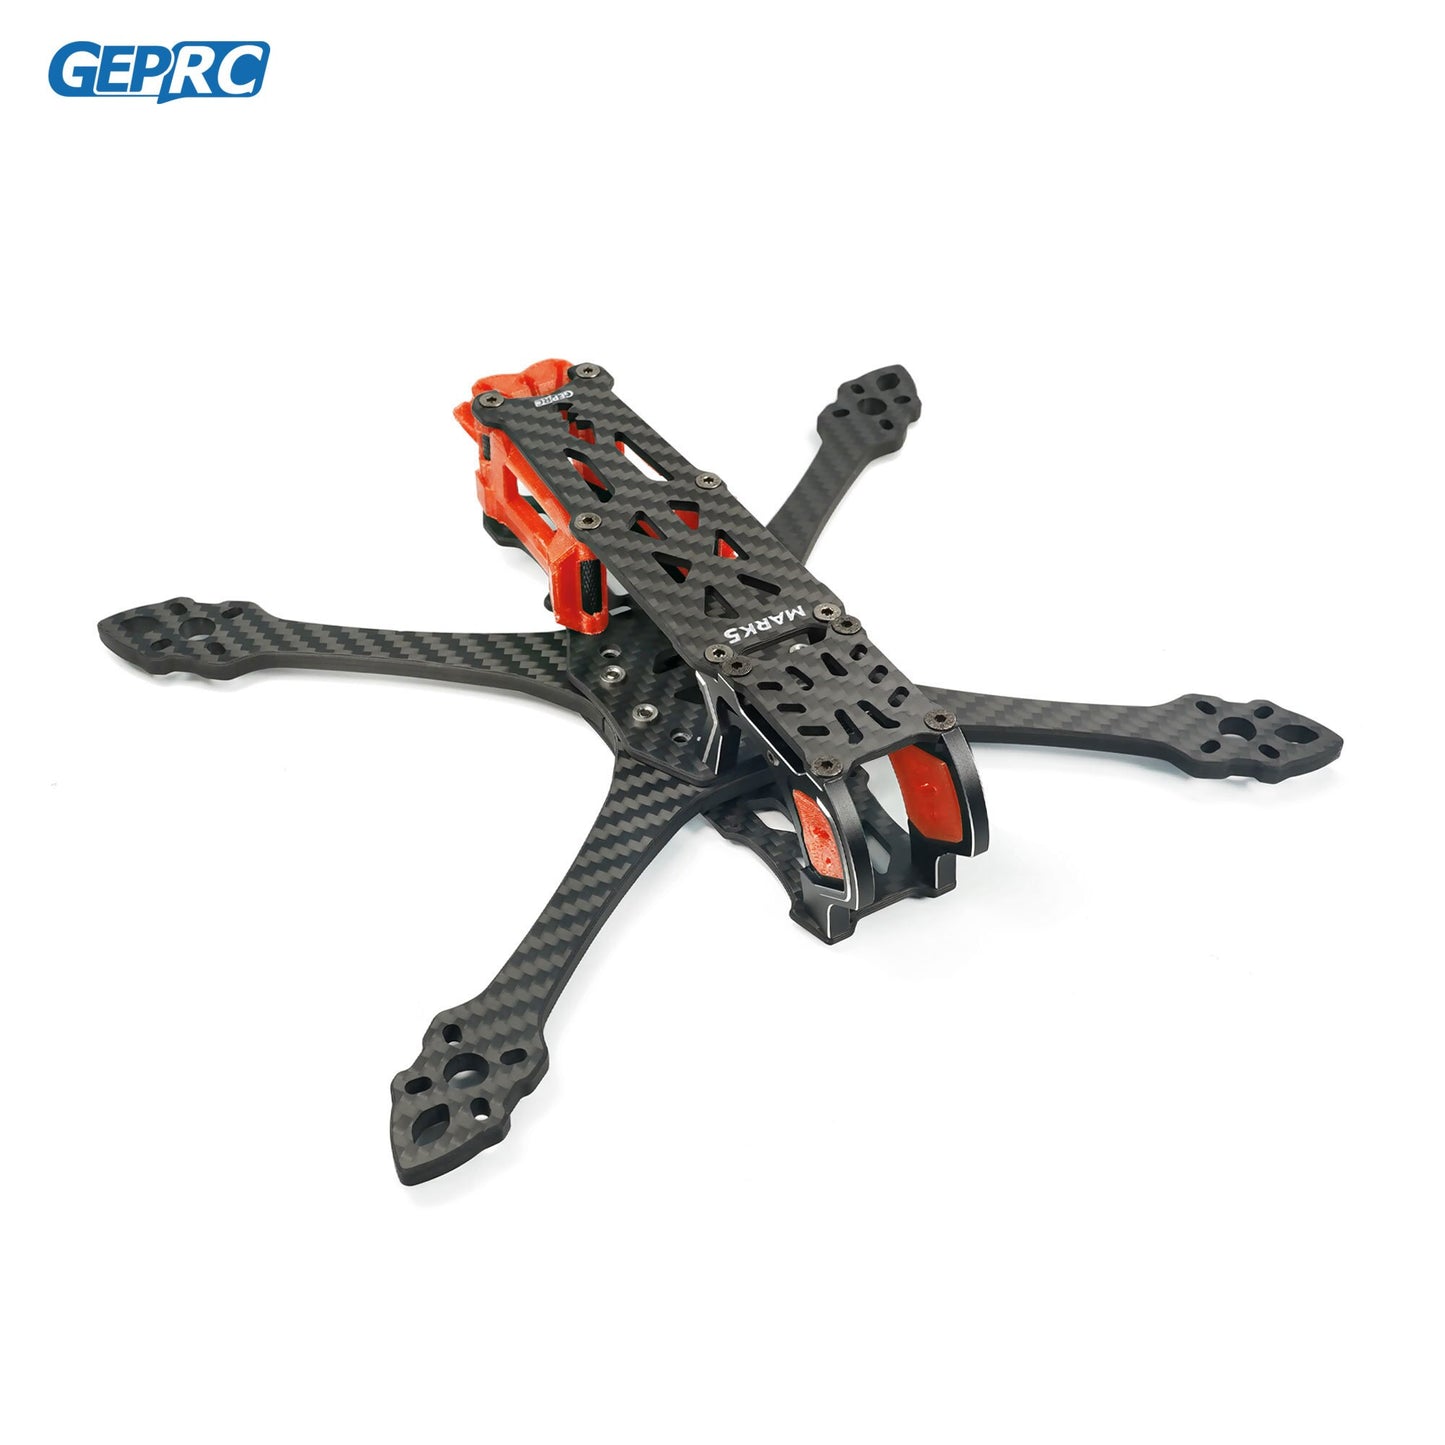 GEP-MK5 O3 Frame X Version Frame Parts Propeller Accessory - Base Quadcopter Frame FPV Freestyle RC Racing Drone Mark5